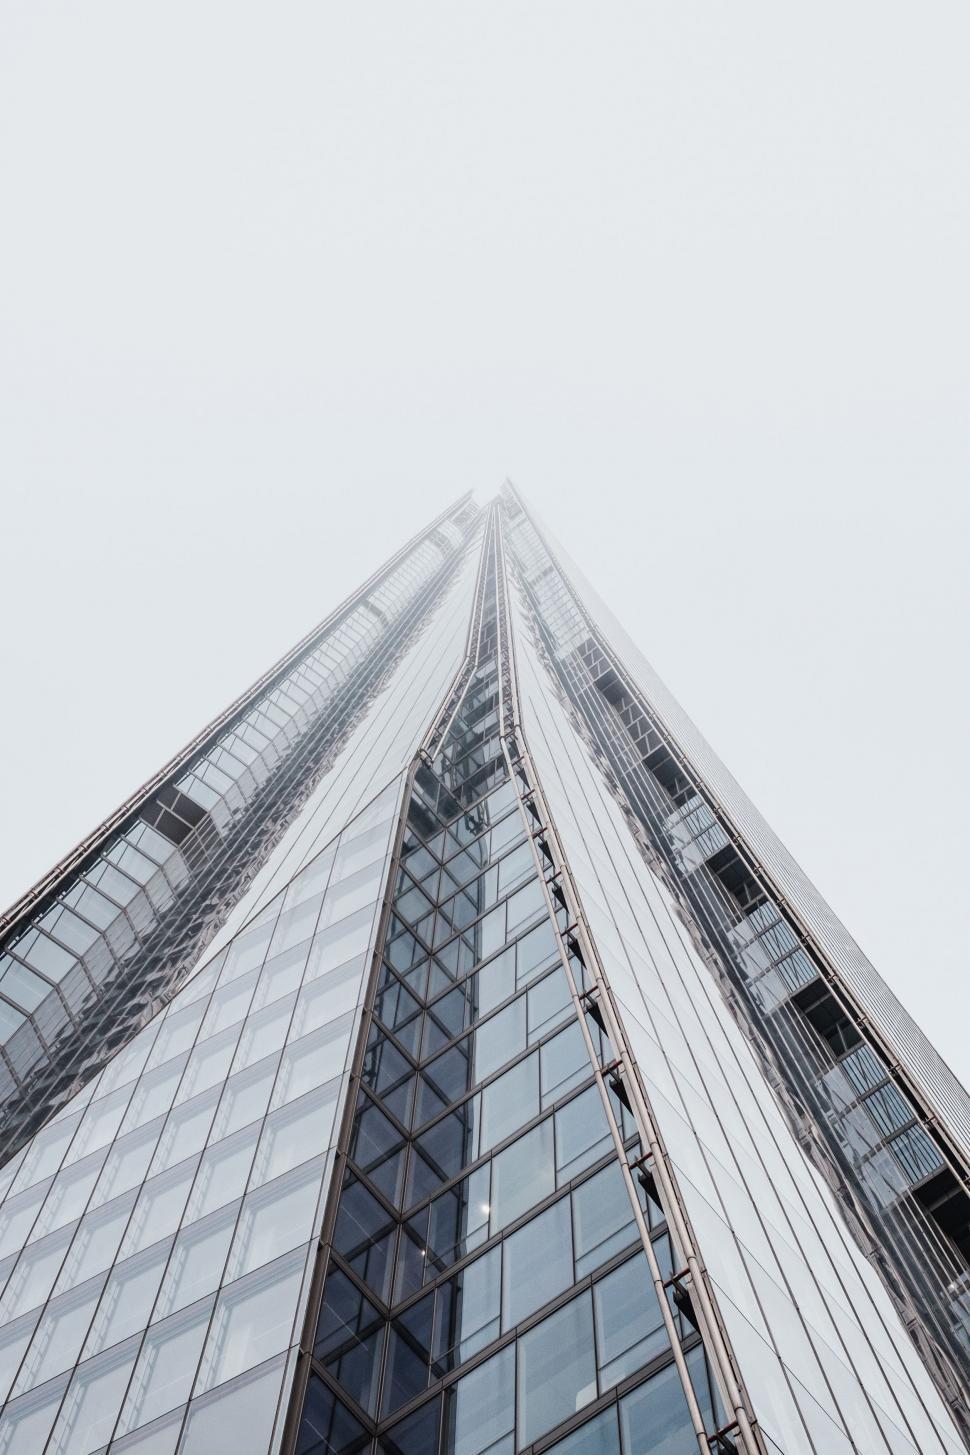 Free Image of Towering Skyscraper With Numerous Windows 